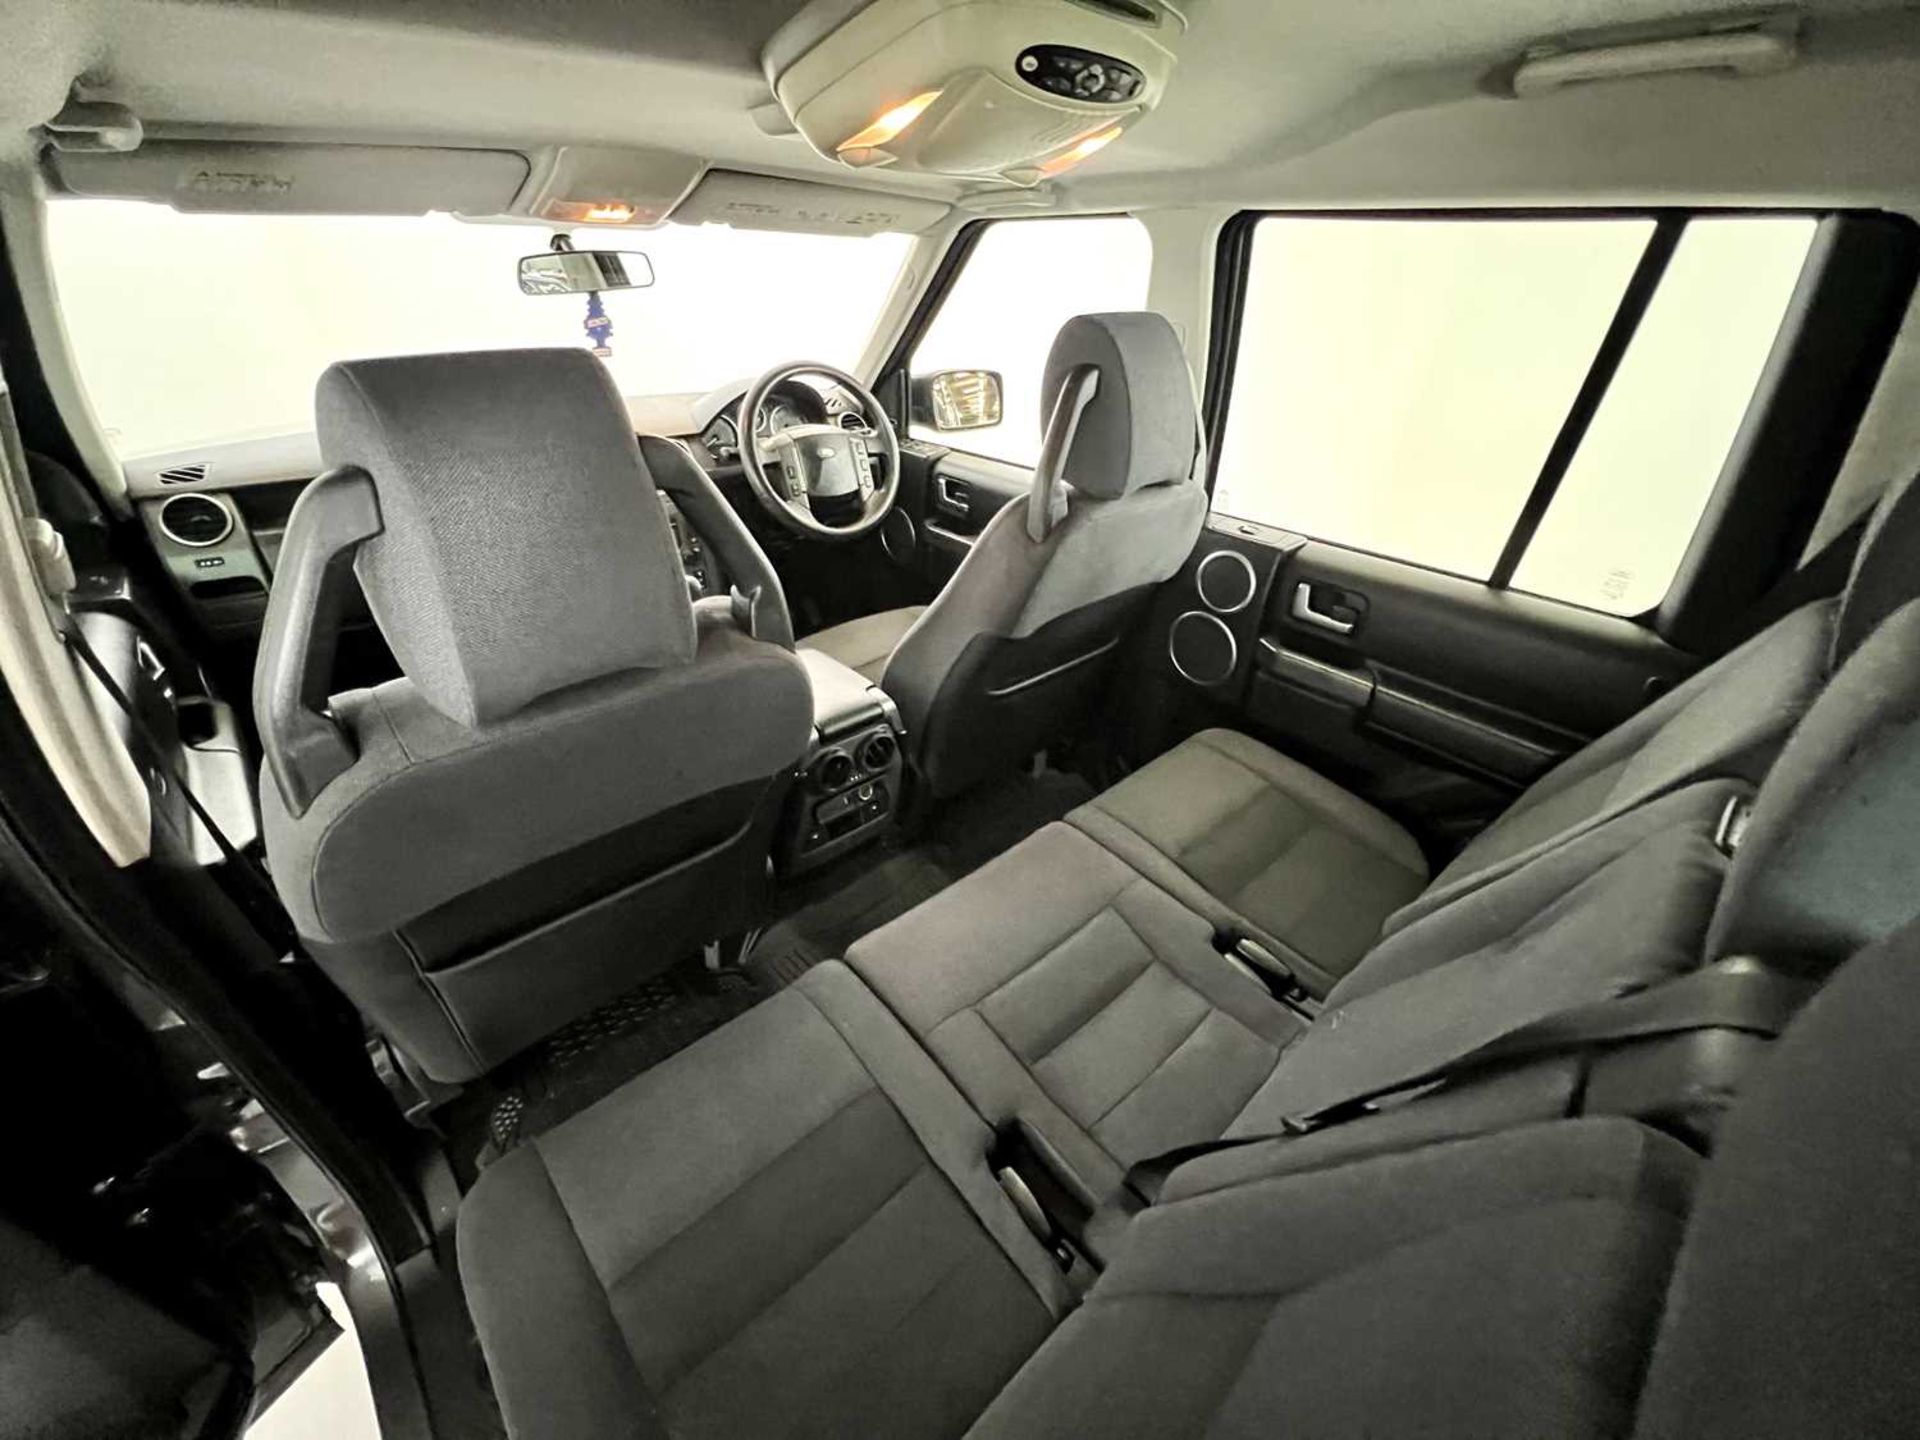 2005 Land Rover Discovery - Image 25 of 36